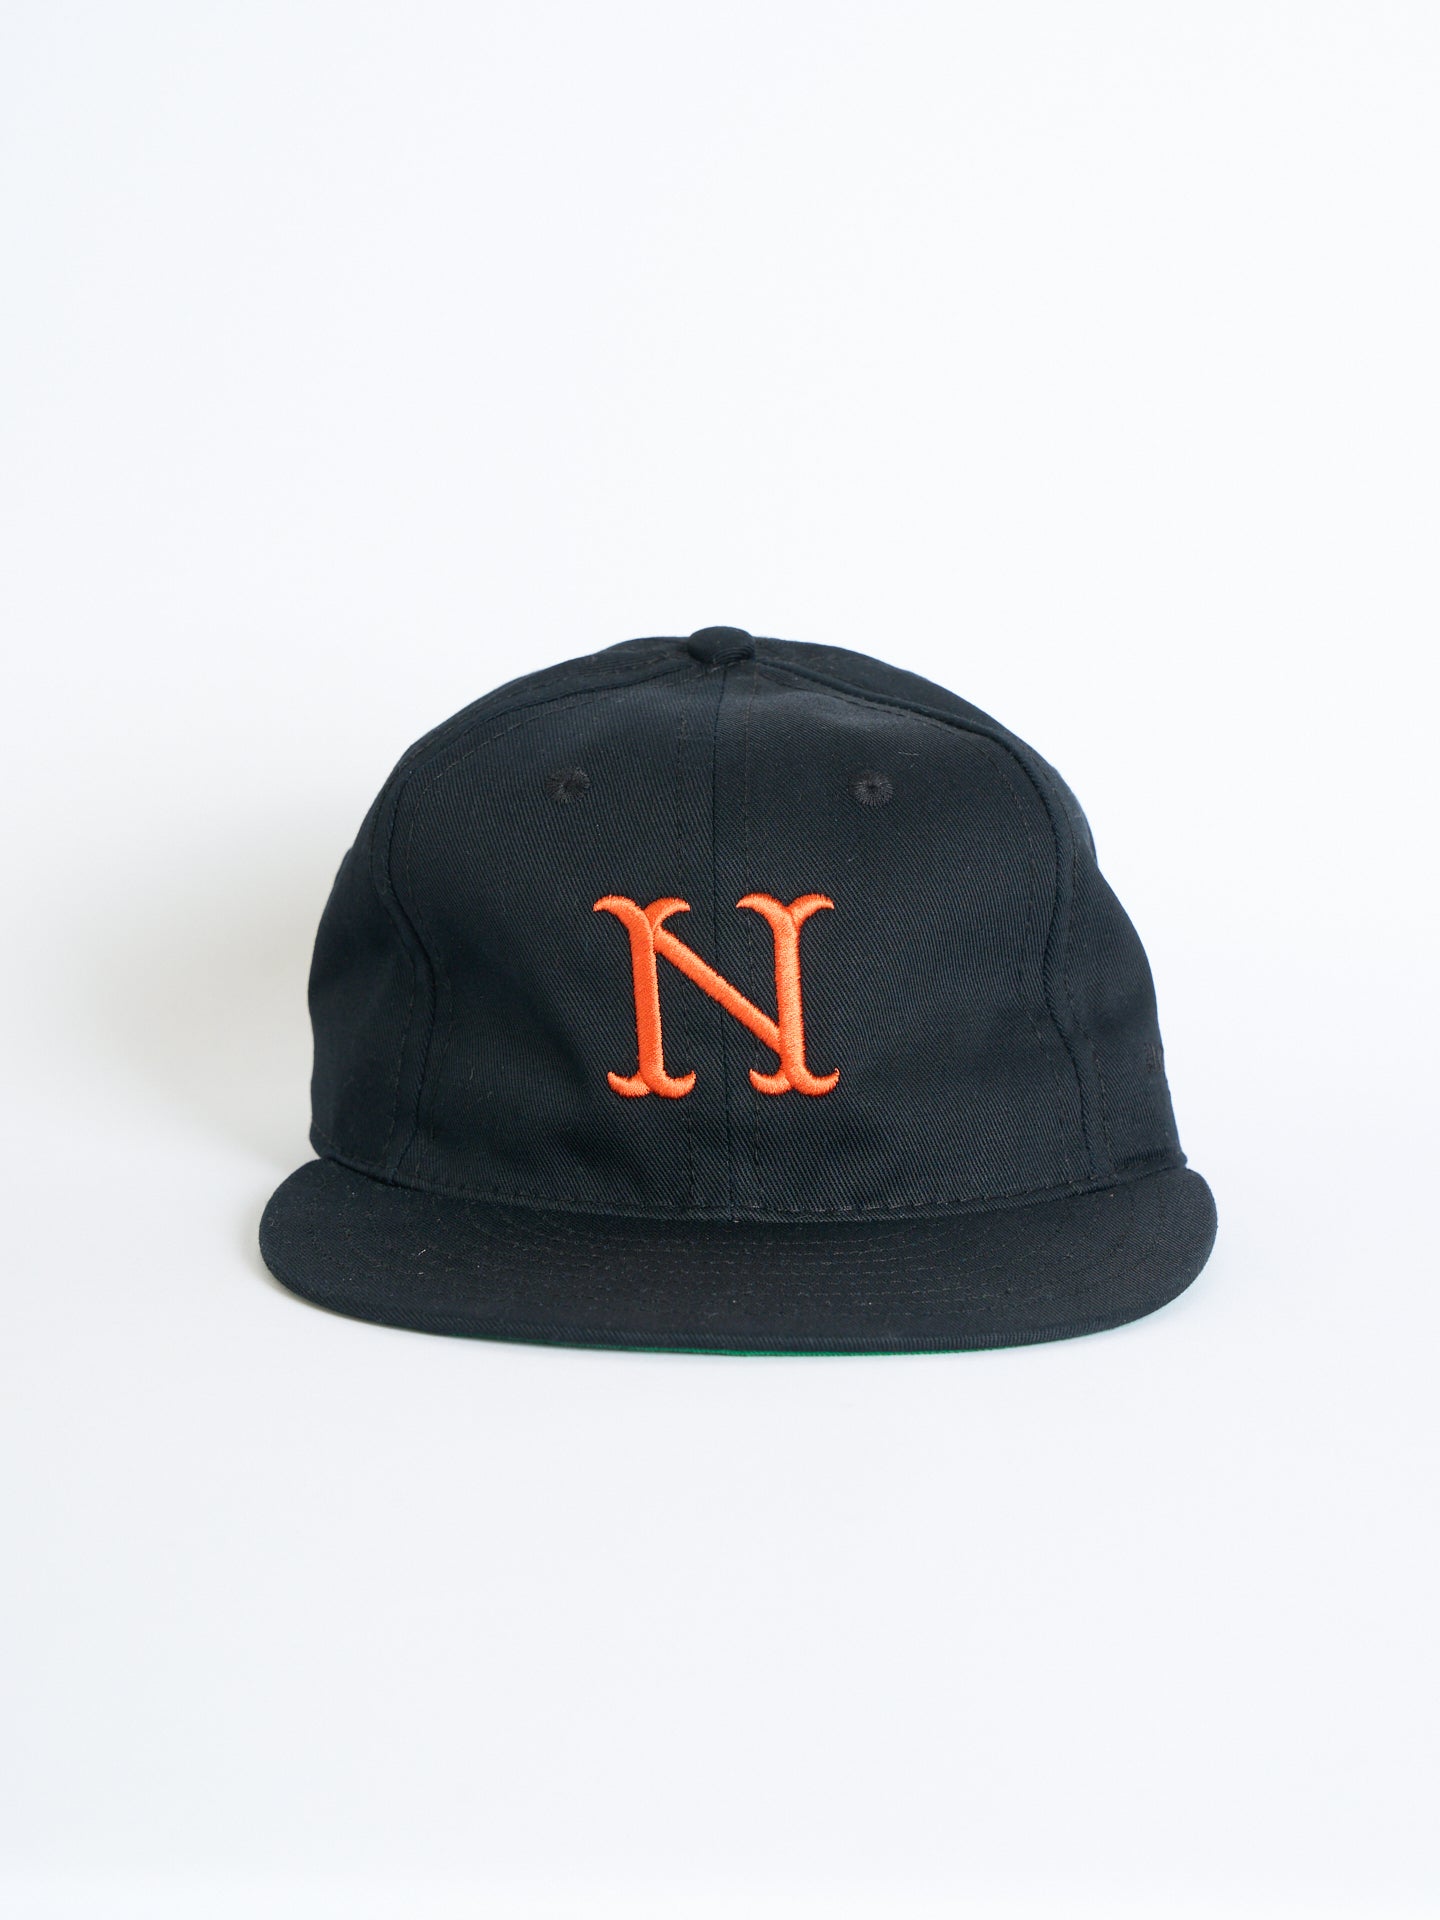 NNY x Ebbets Field Flannels - Queens Snapback - Black - Cotton